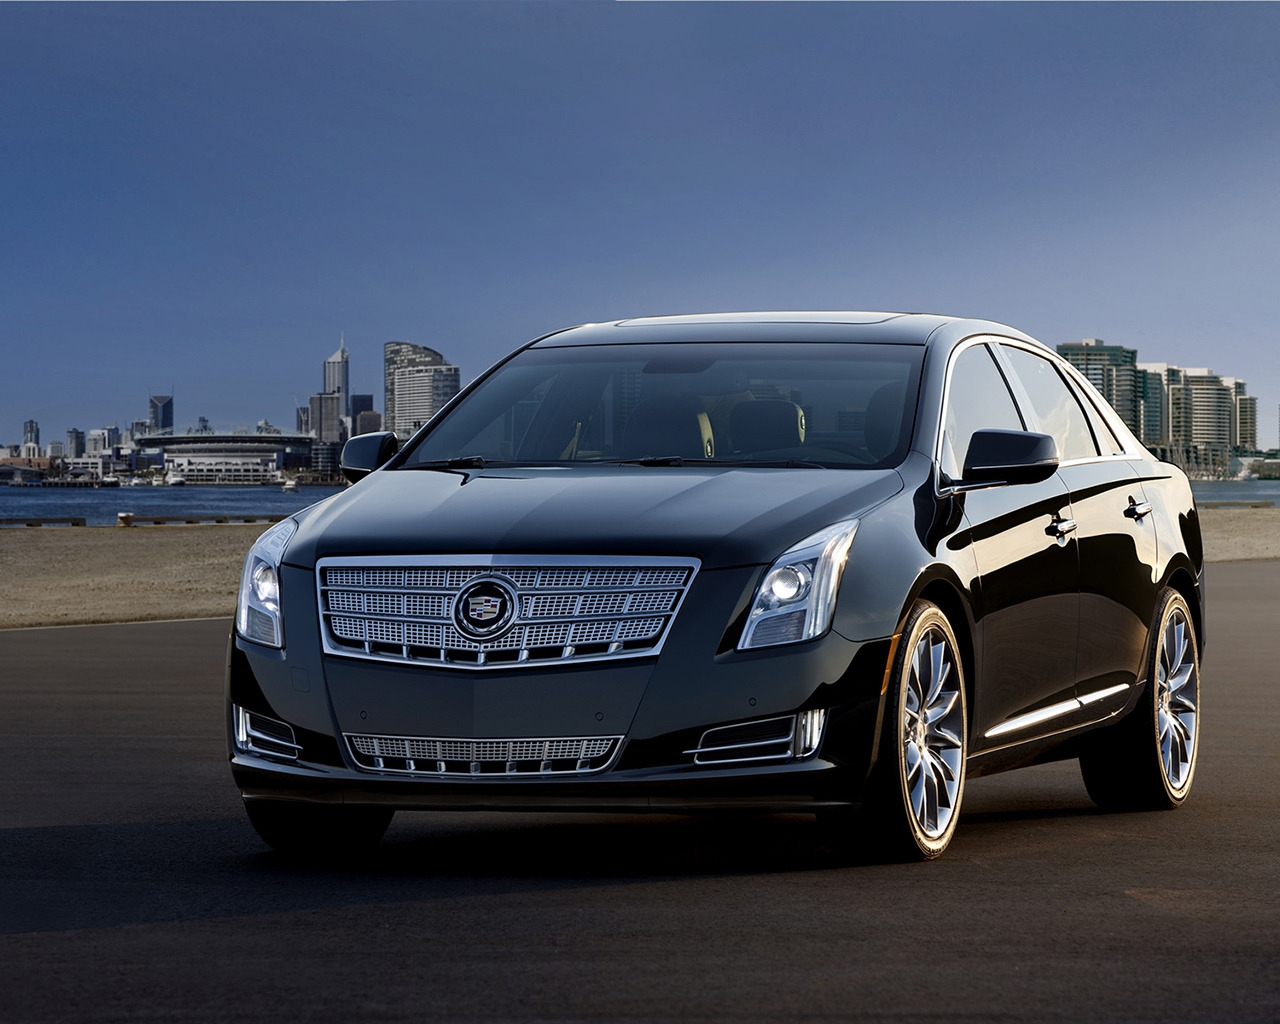 Cadillac XTS 2013 Edition for 1280 x 1024 resolution